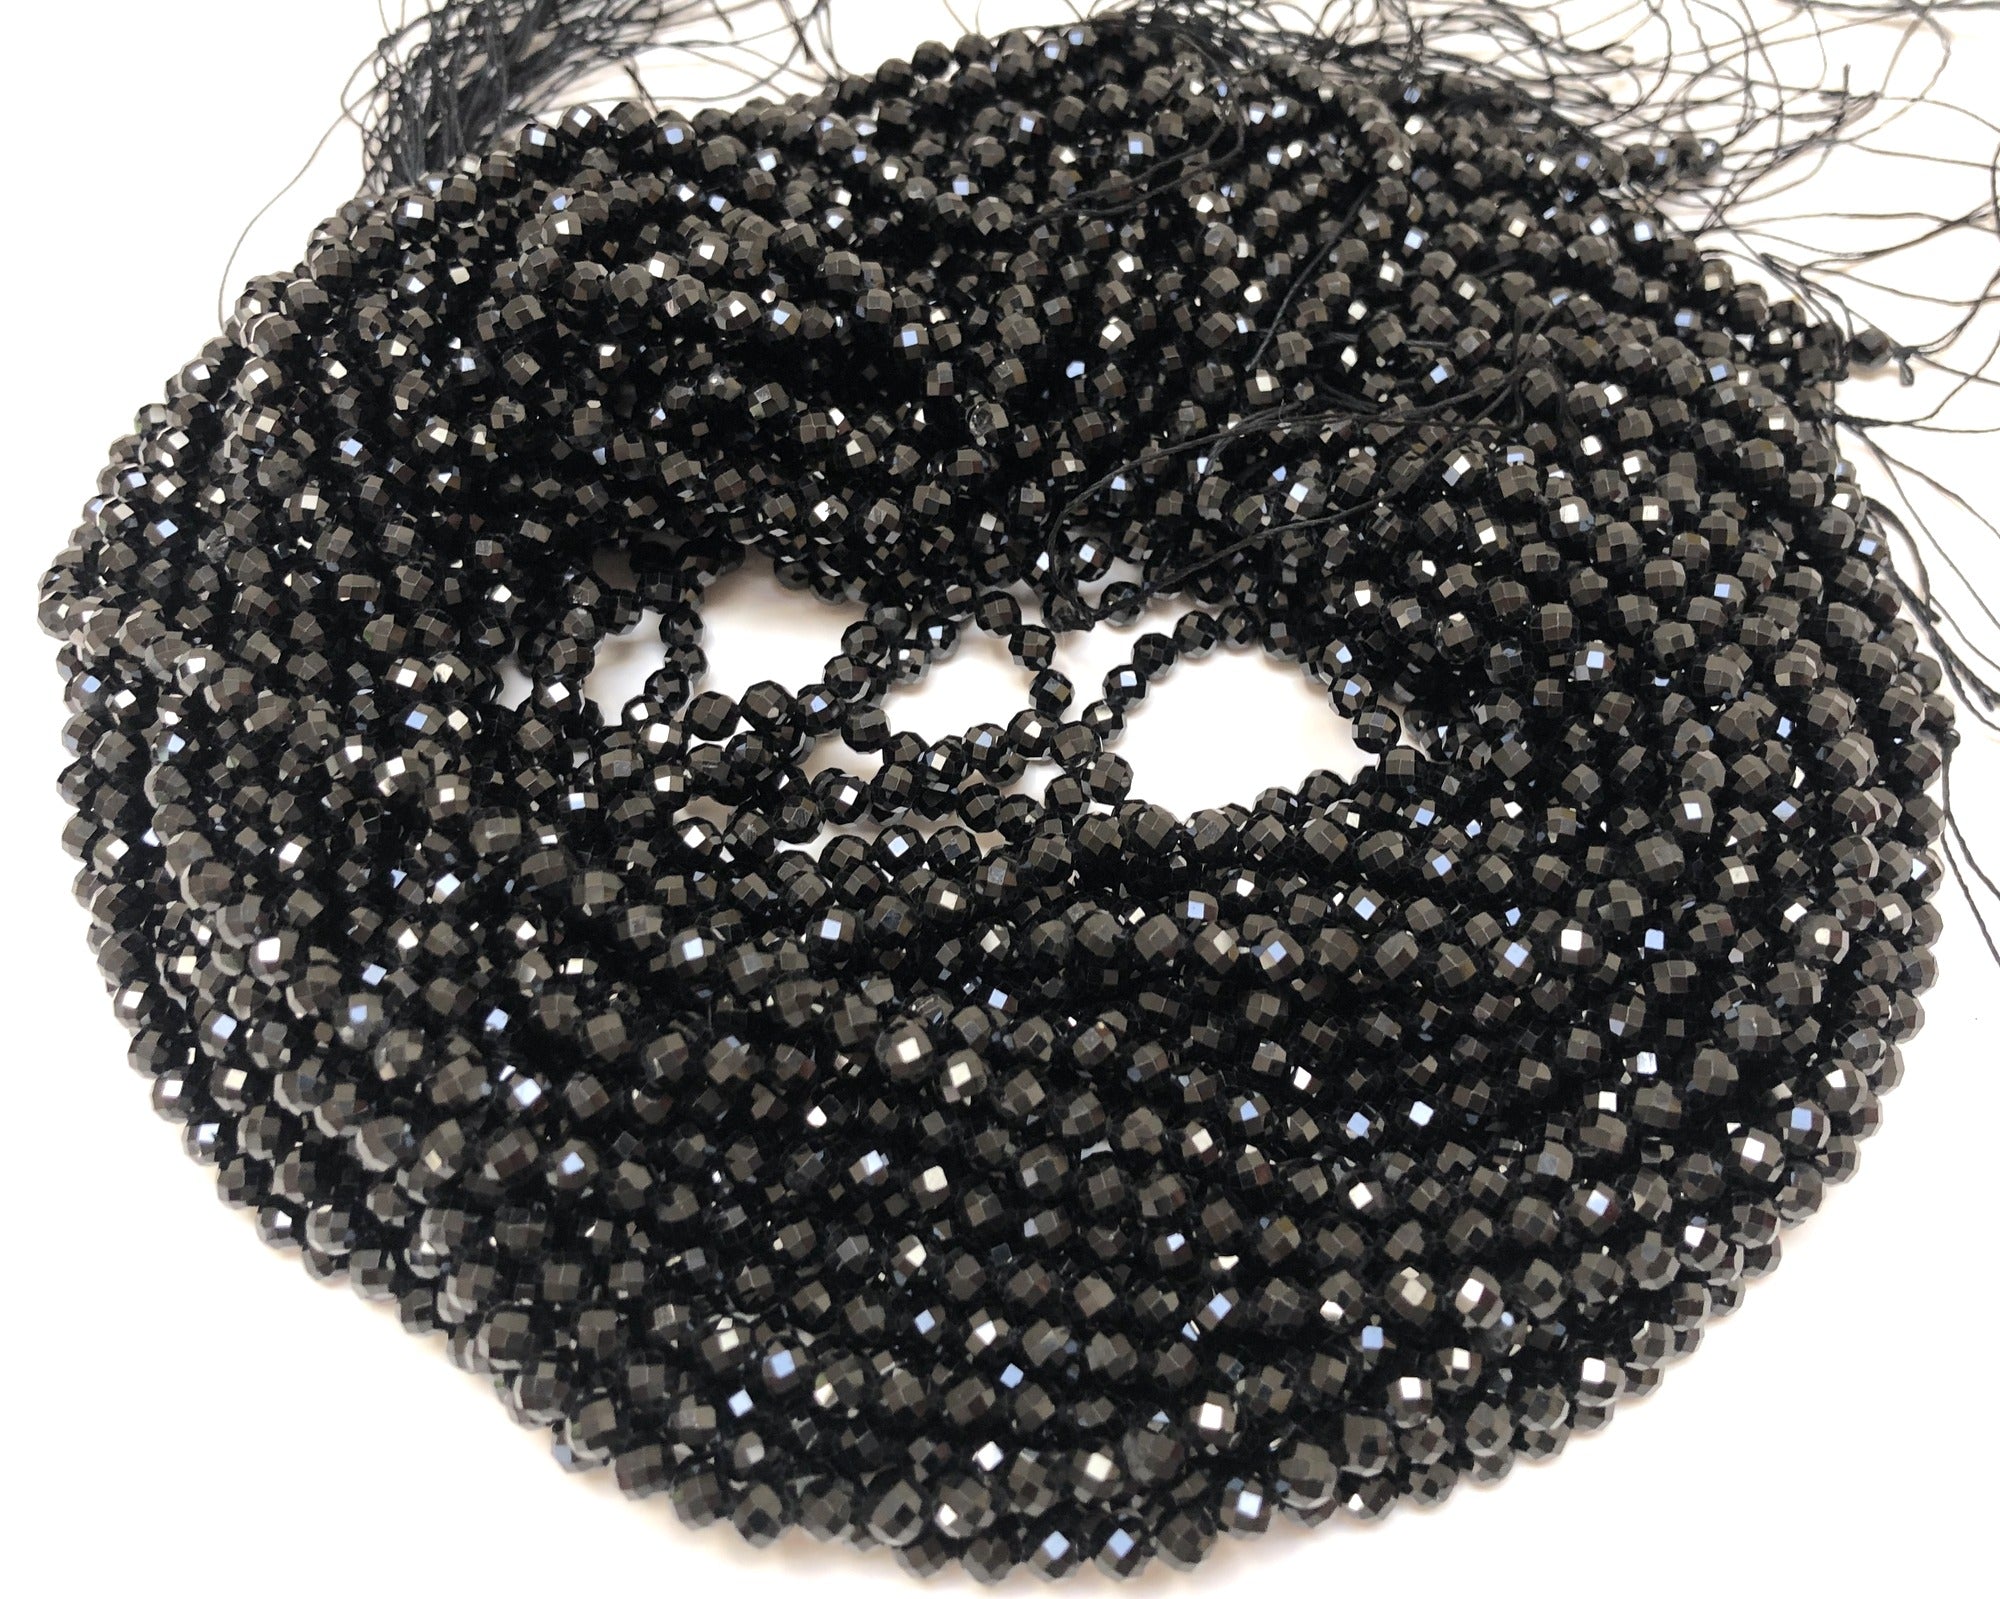 Black Spinel 2mm 3mm 4mm faceted round natural gemstone beads 15.5" strand - Oz Beads 